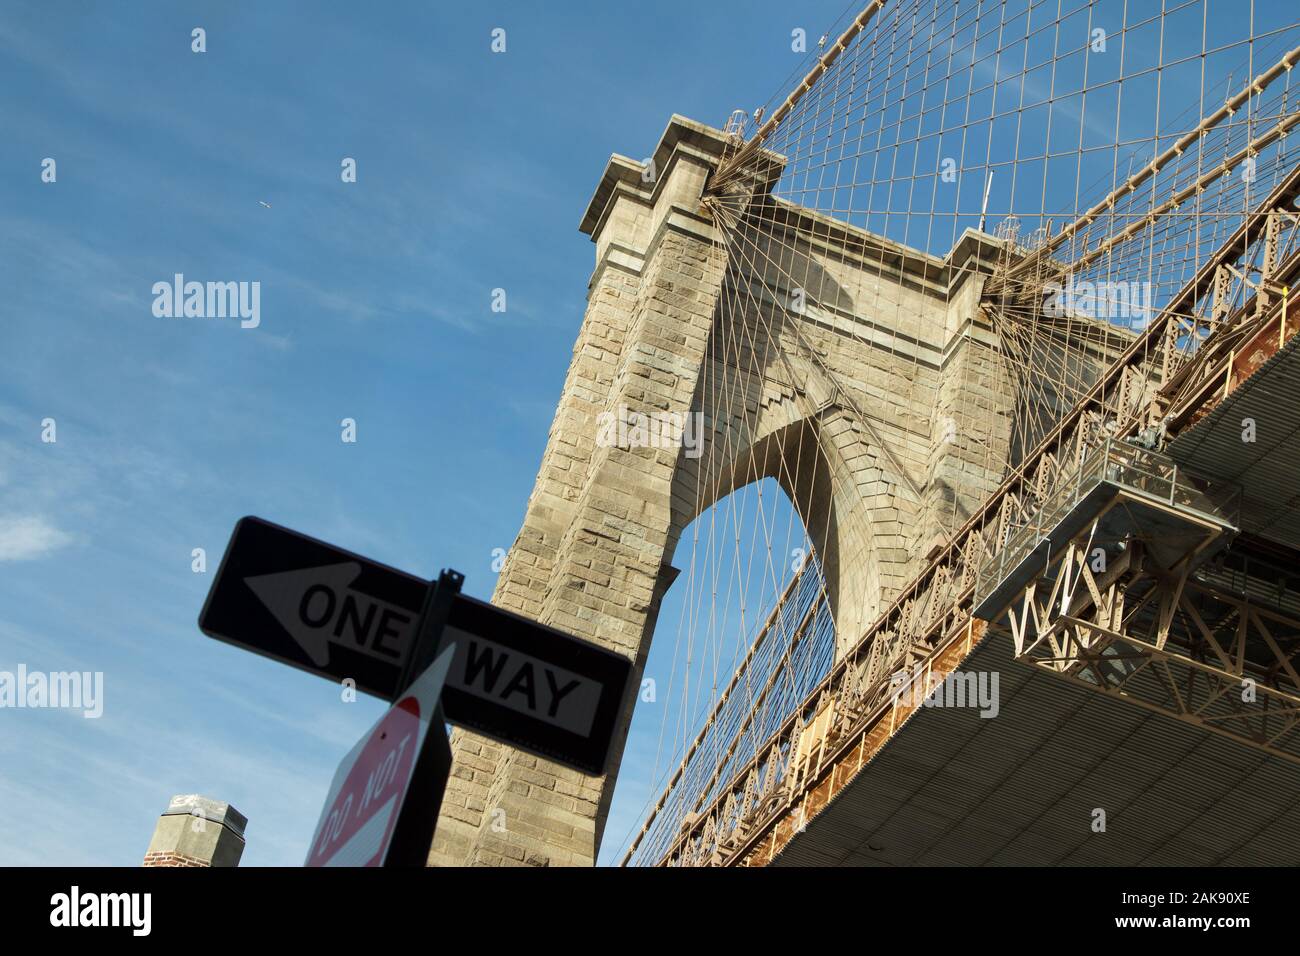 Iconic image of Brooklyn Bridge looking up on a blue day with one way street sign in foreground. Stone suspension bridge with wires seen from low look Stock Photo